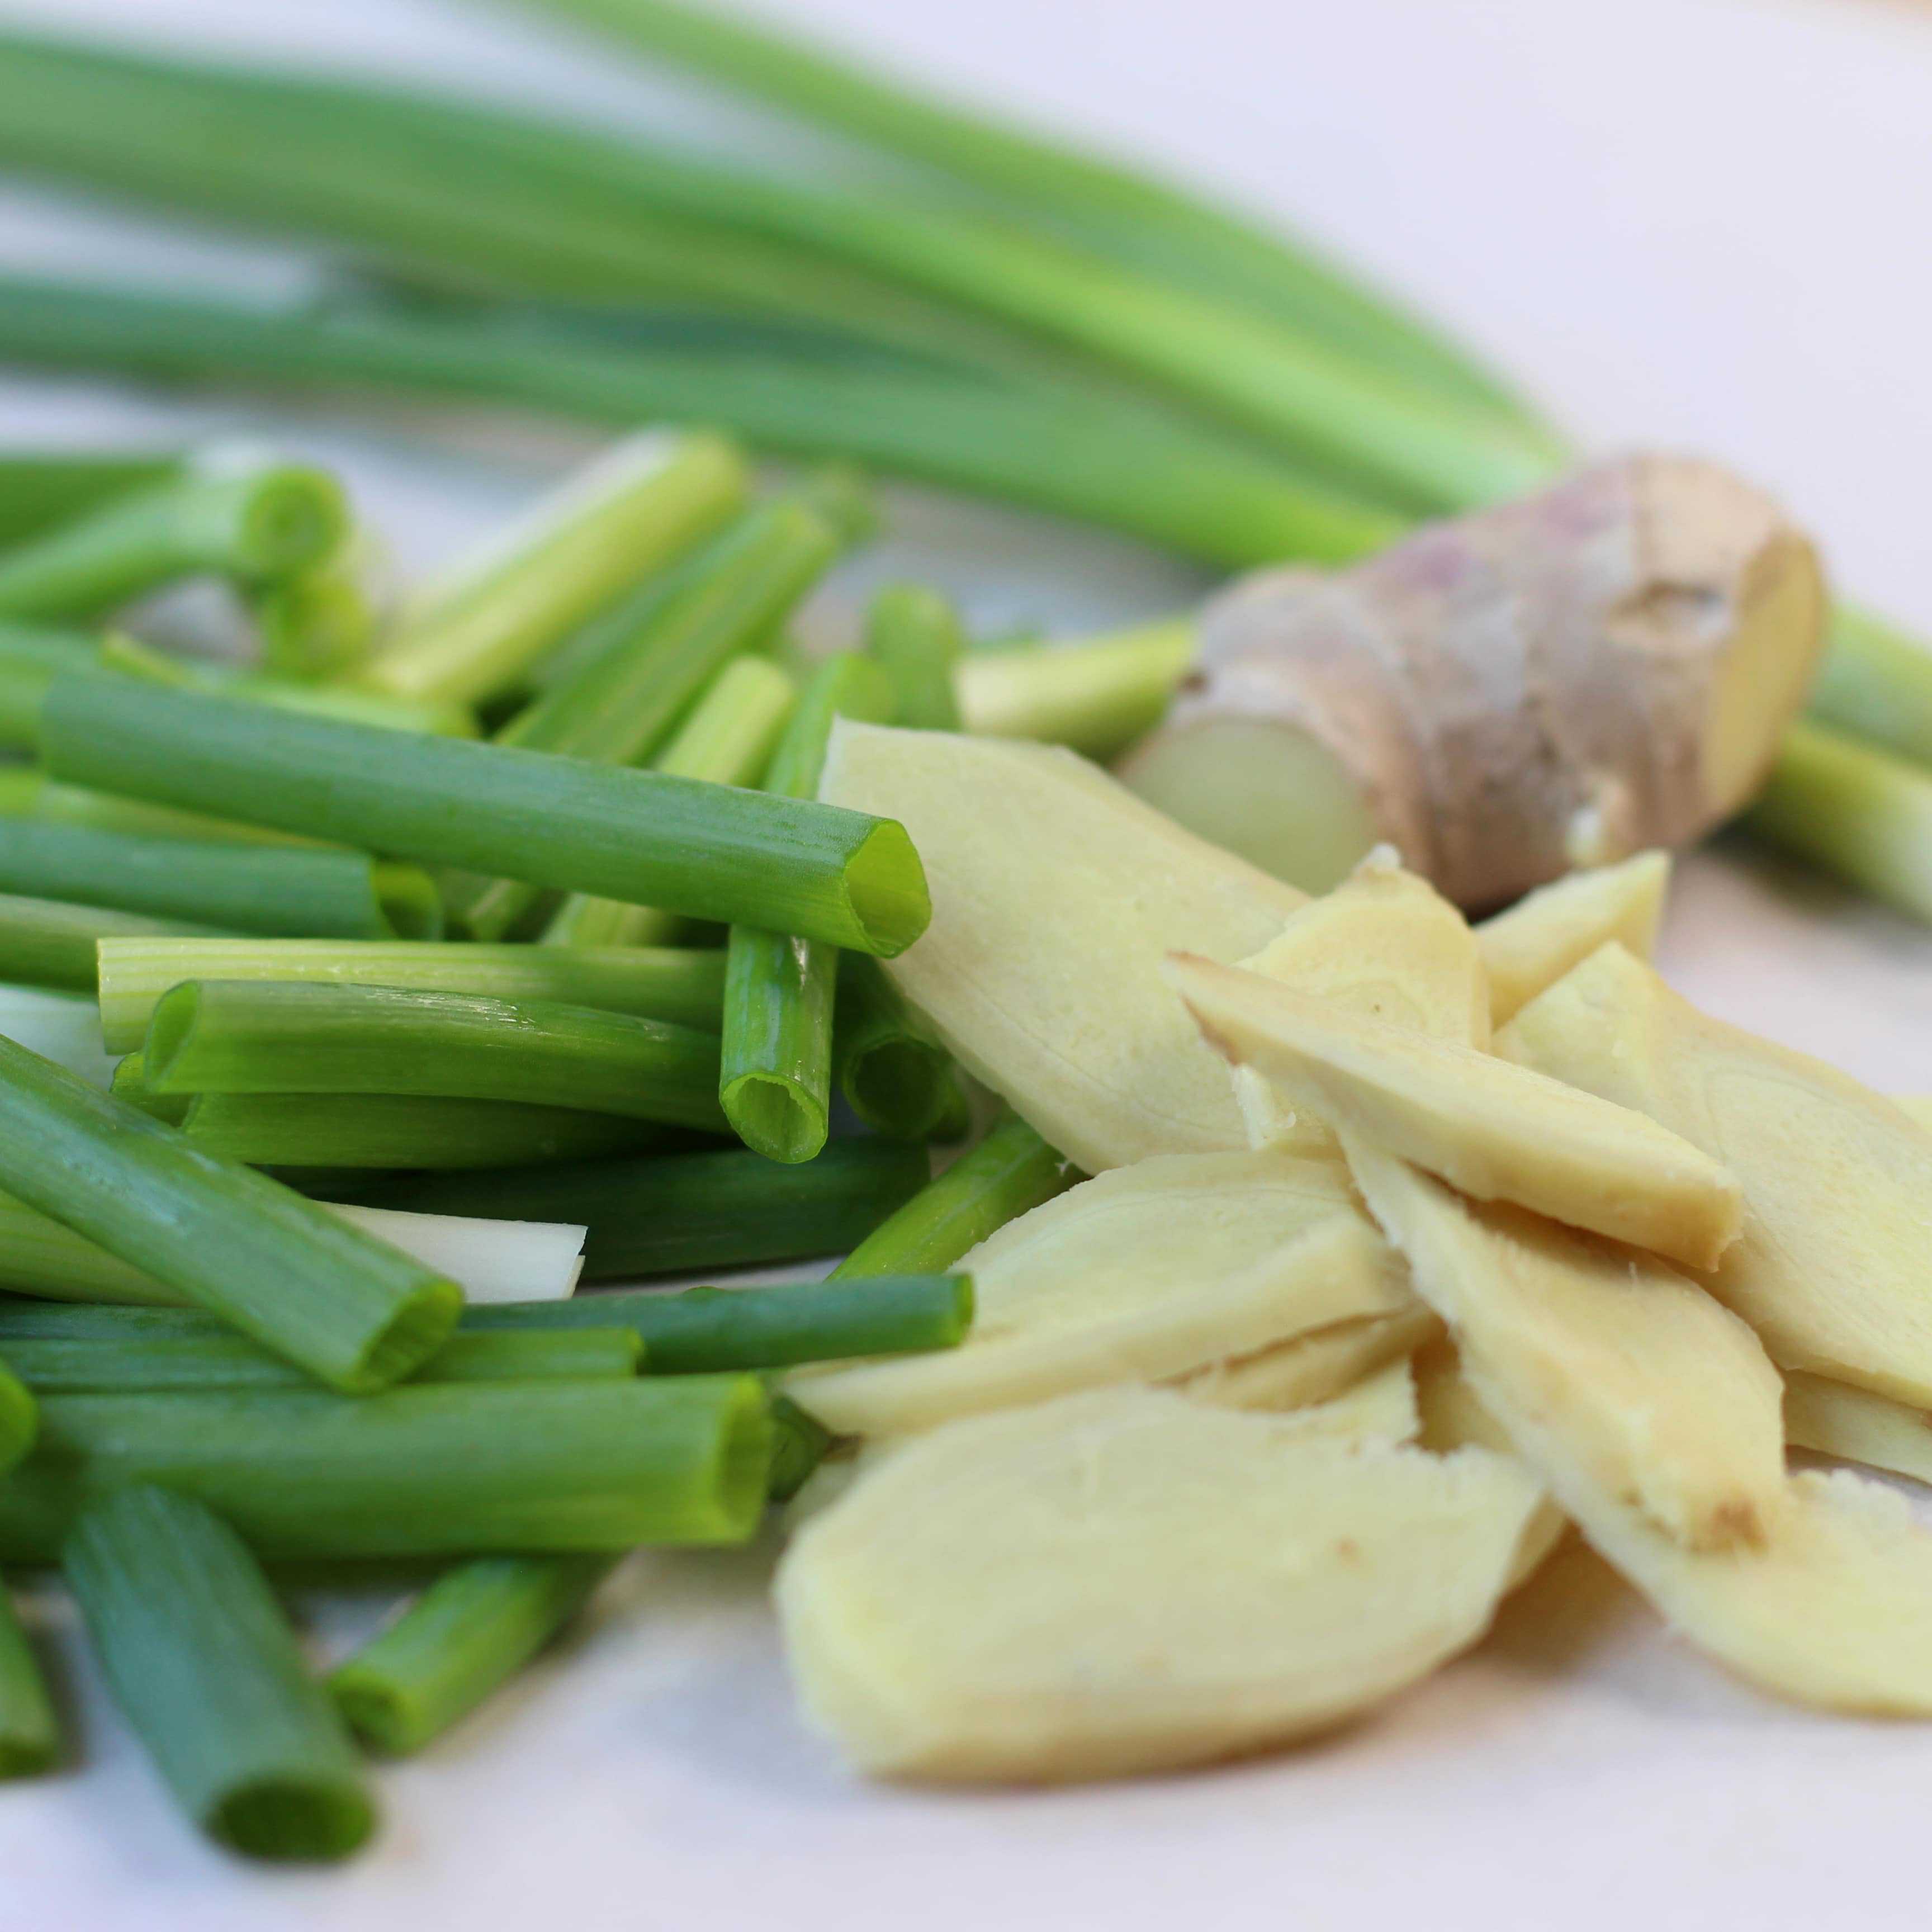 Sliced ginger and scallions